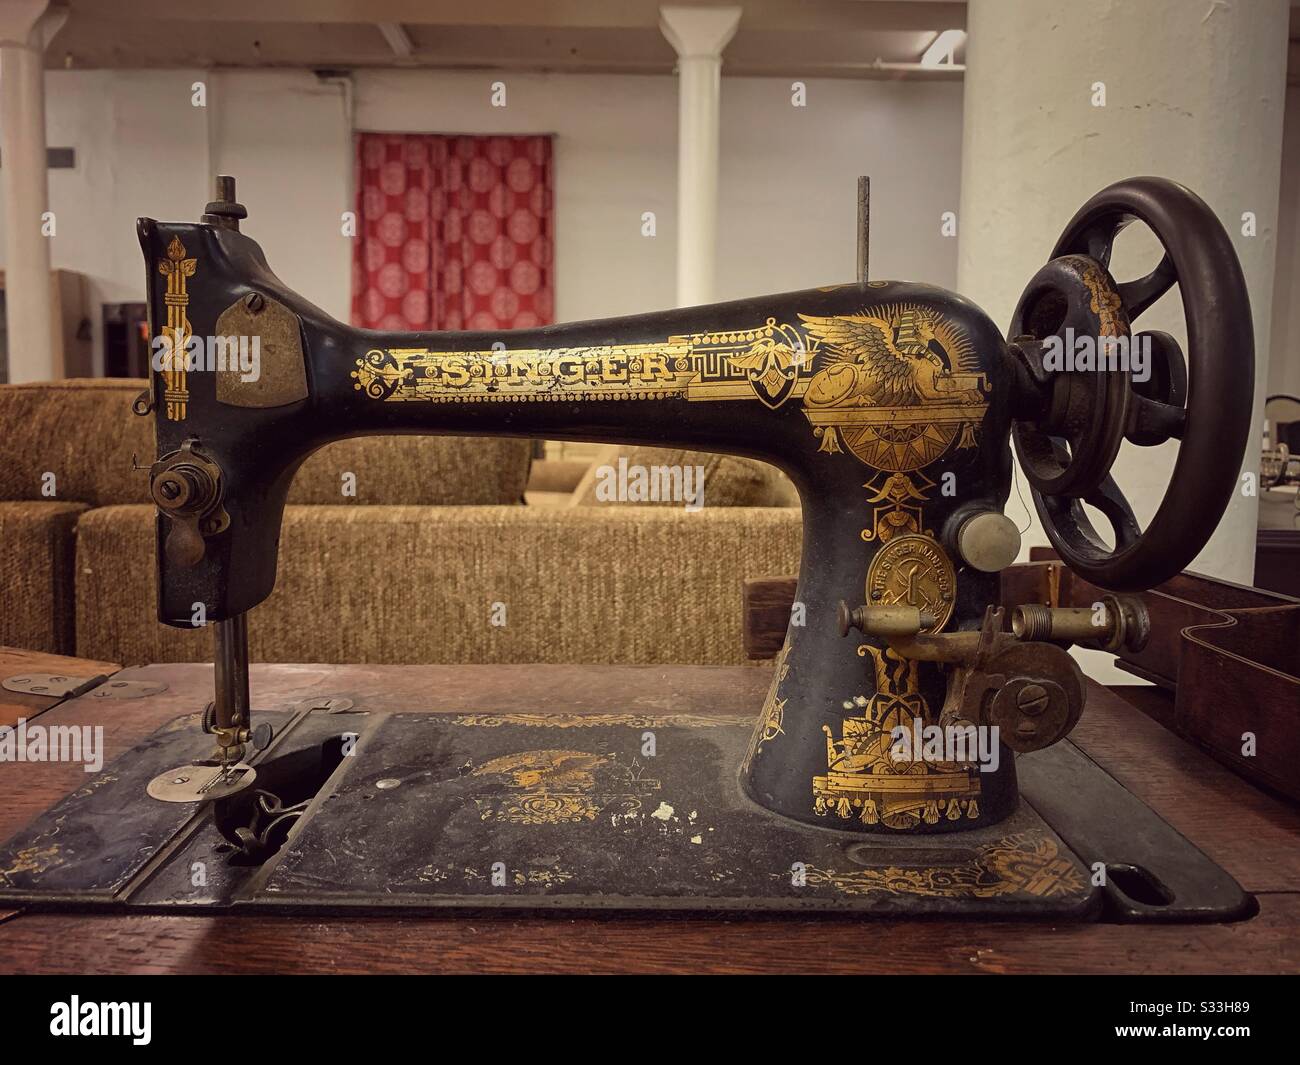 Vintage Singer hand cranked sewing machine with gold inlay logo and Egyptian decoration Stock Photo